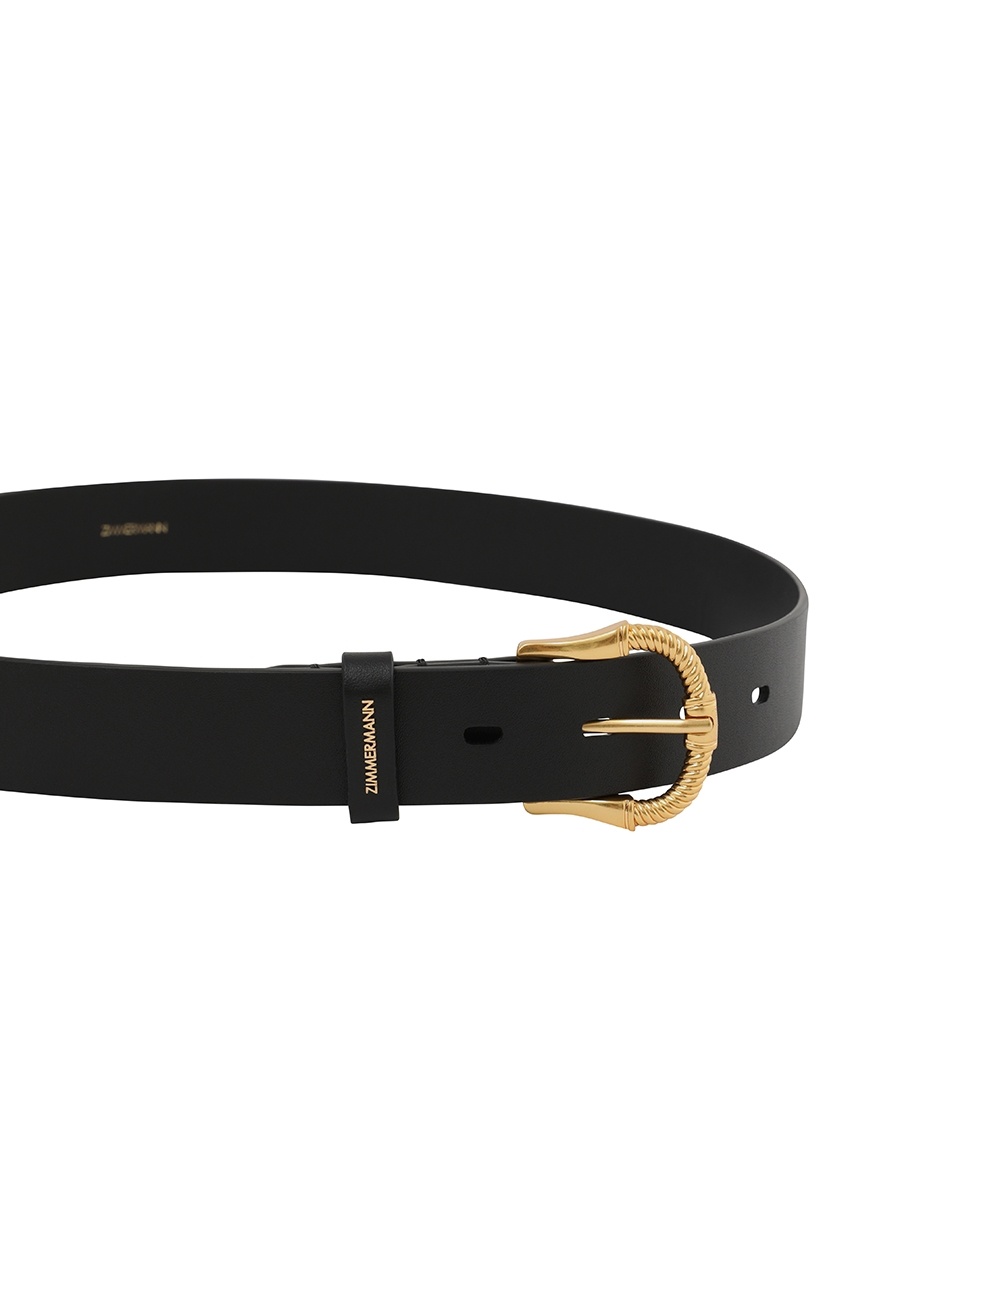 TWISTED BUCKLE LEATHER BELT 30 - 4